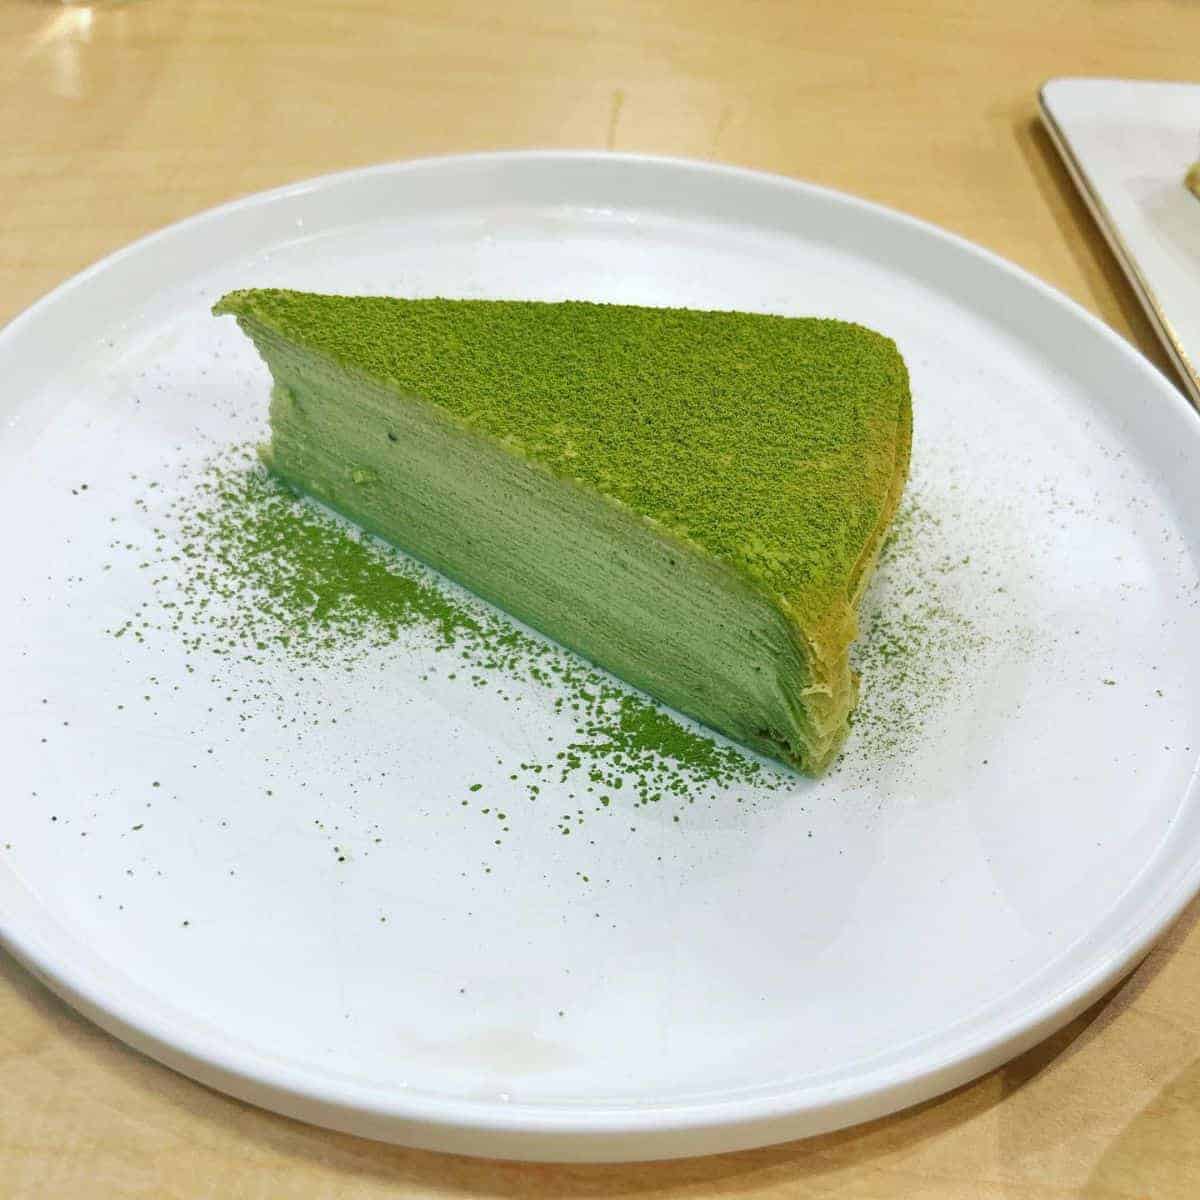 A refreshing dessert topped with green powder for a nicer finish